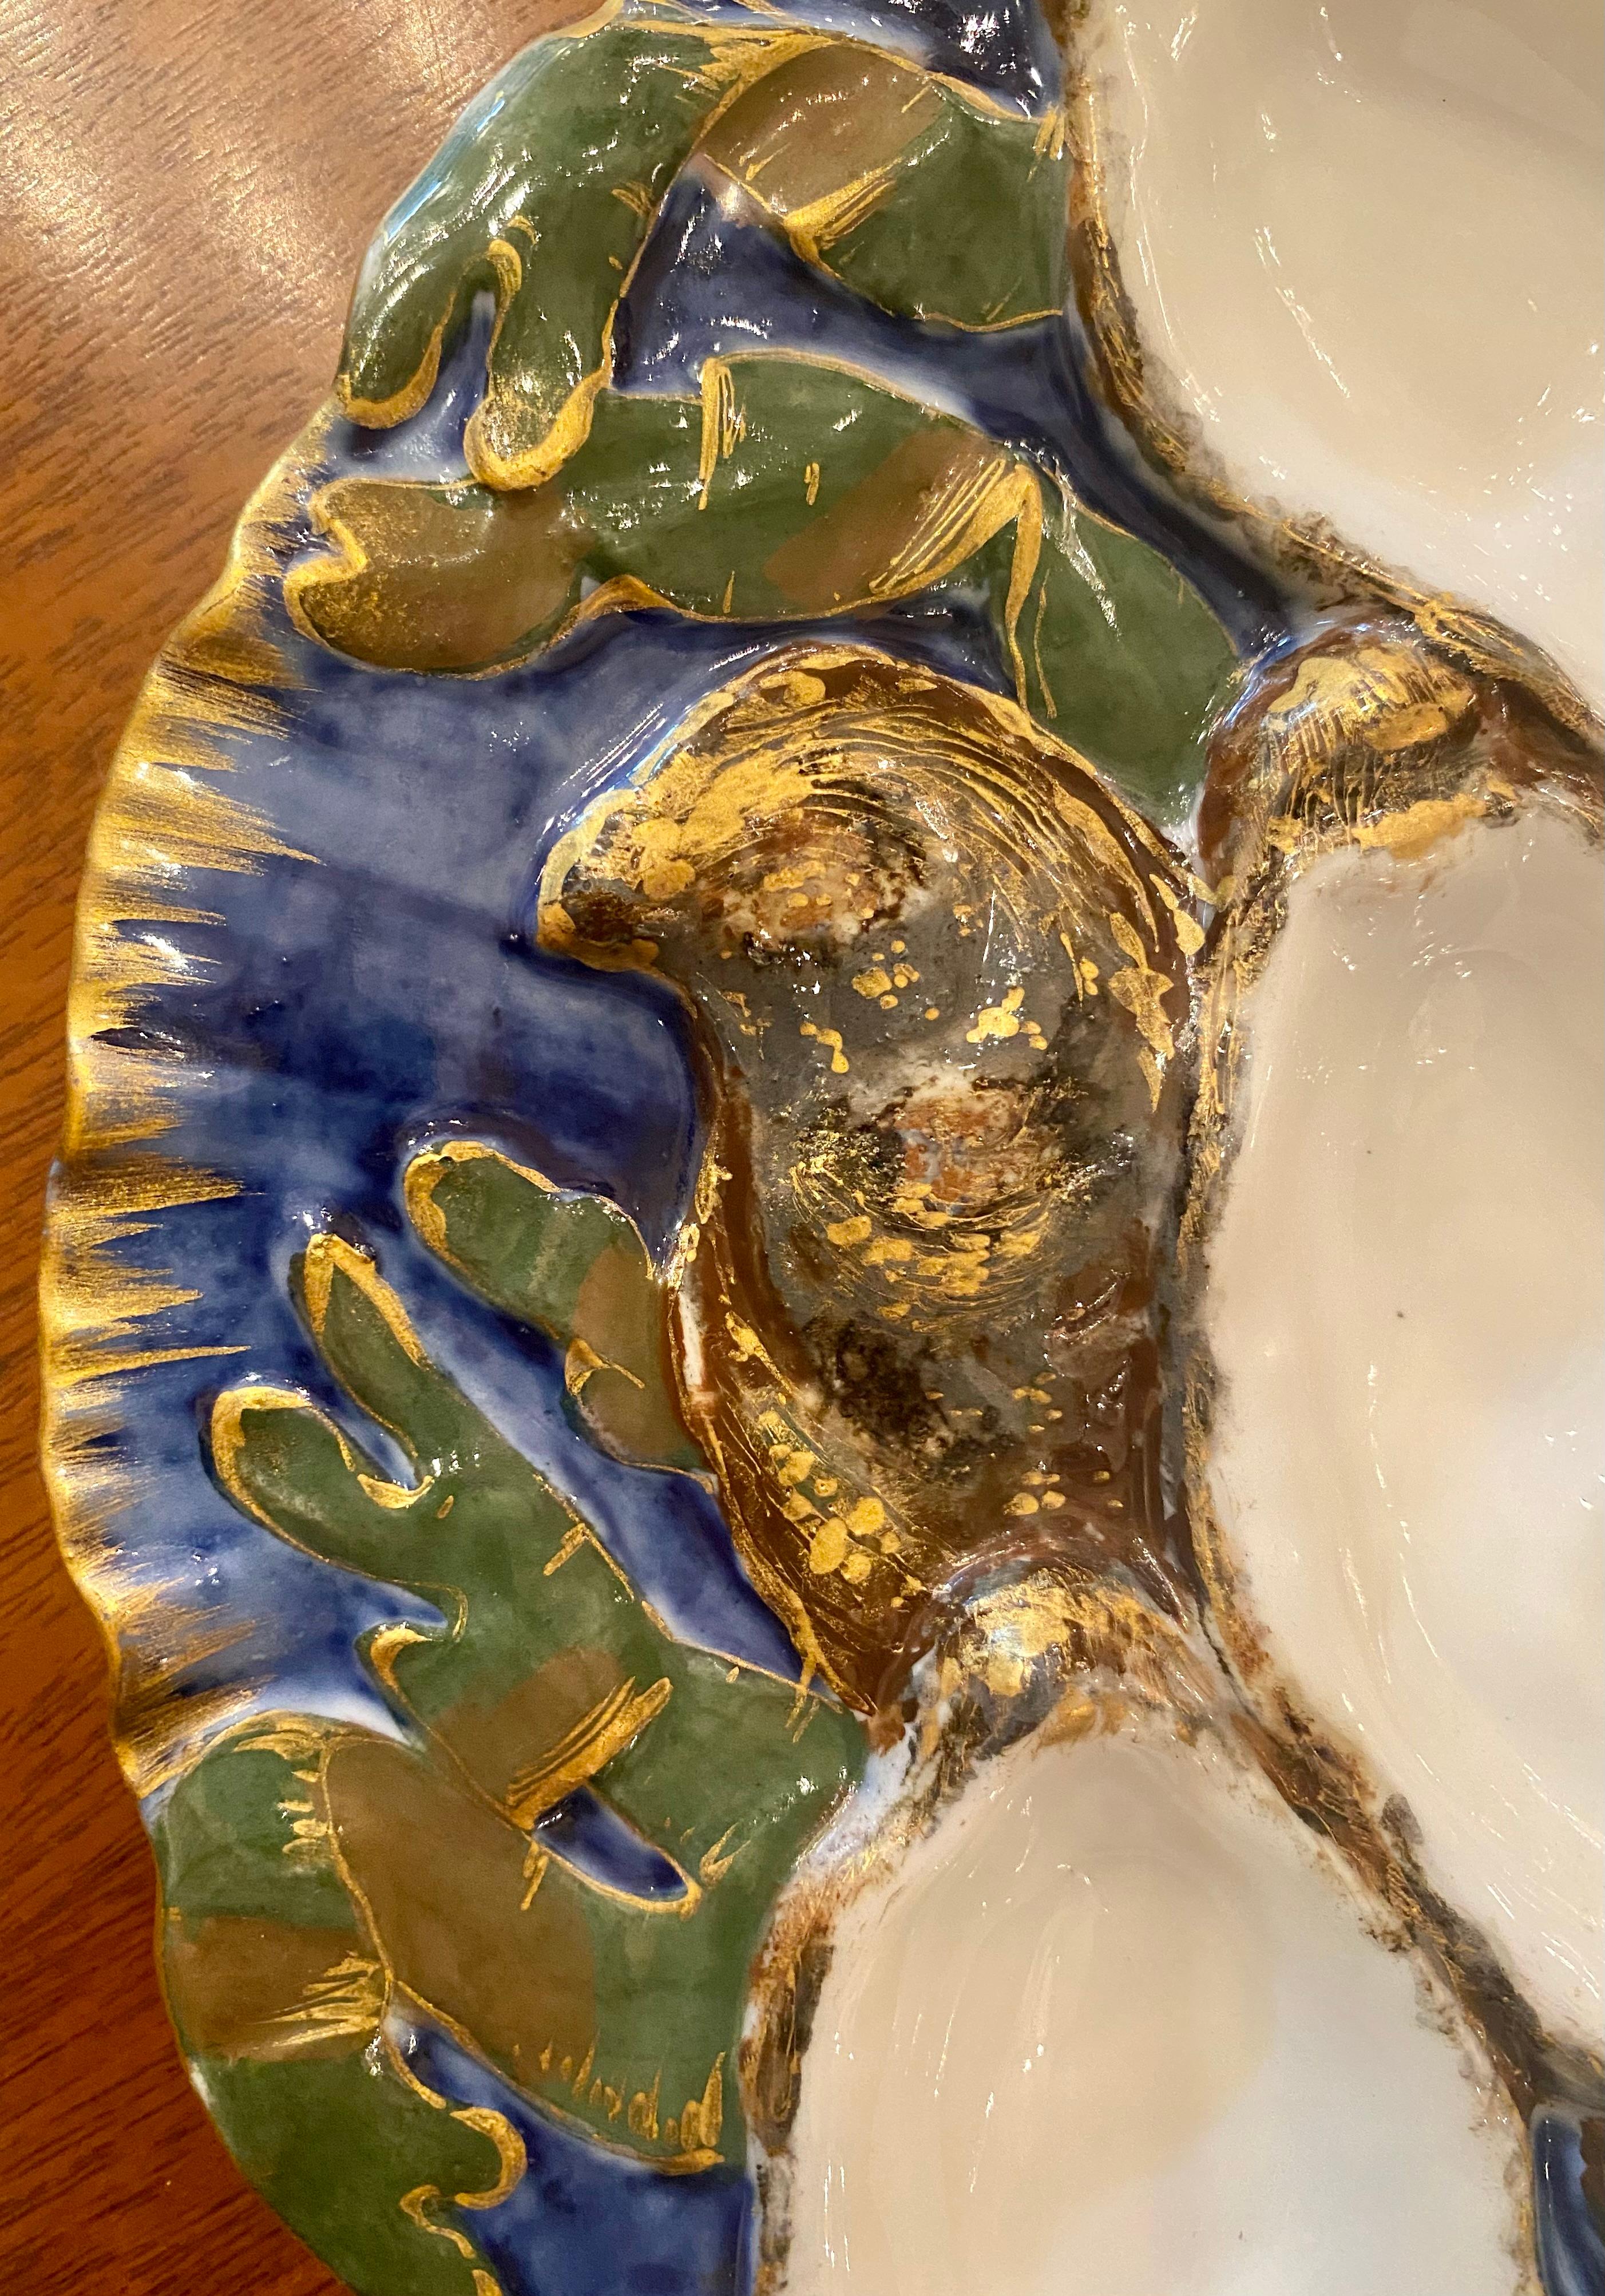 Antique French hand-painted Limoges Porcelain Presidential Oyster Plate in the Original Turkey Pattern, Circa 1880's. 
Commissioned by the administration of American President Rutherford B. Hayes, this plate is the pinnacle of oyster plate